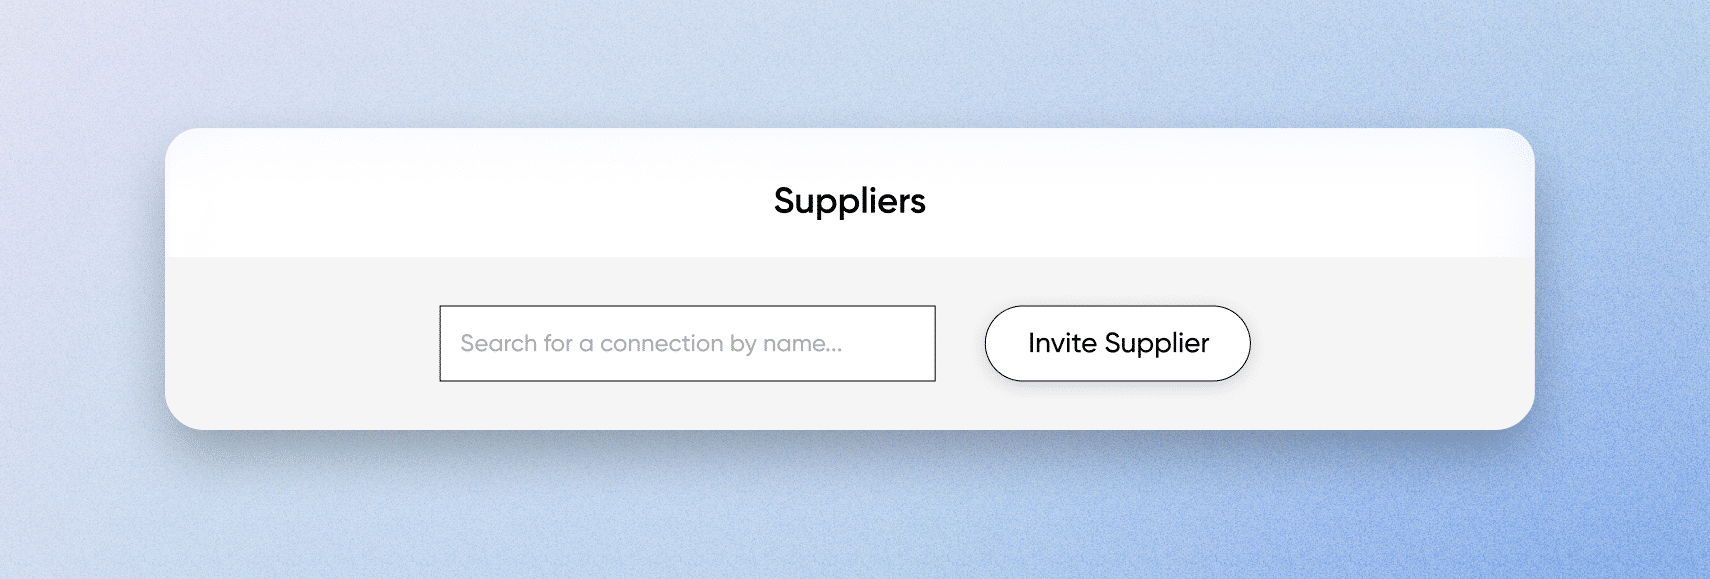 With our latest product update, you can send one-click invitations to new suppliers in fabric Marketplace.